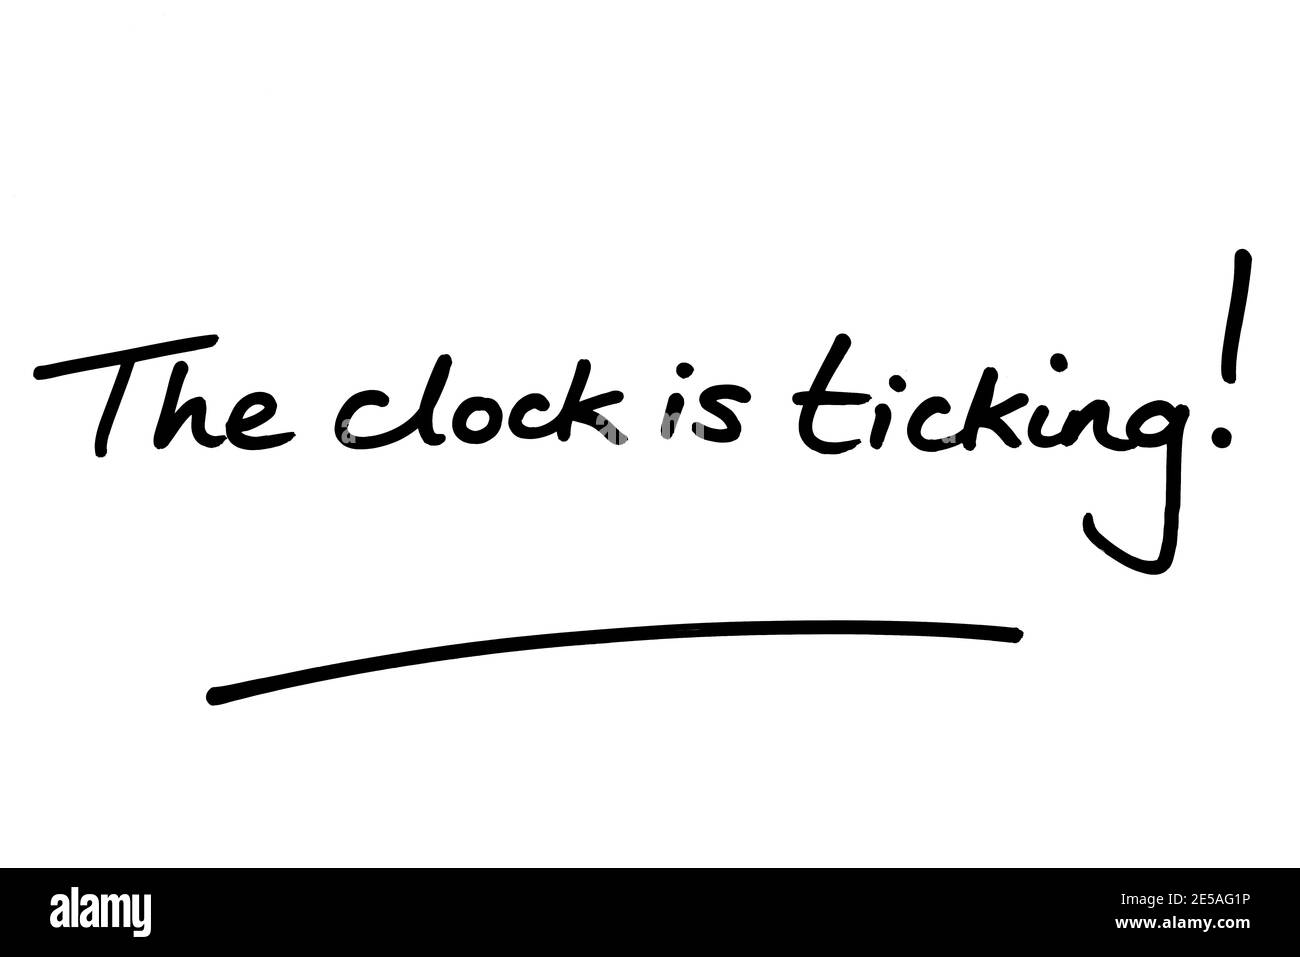 The clock is ticking! handwritten on a white background. Stock Photo